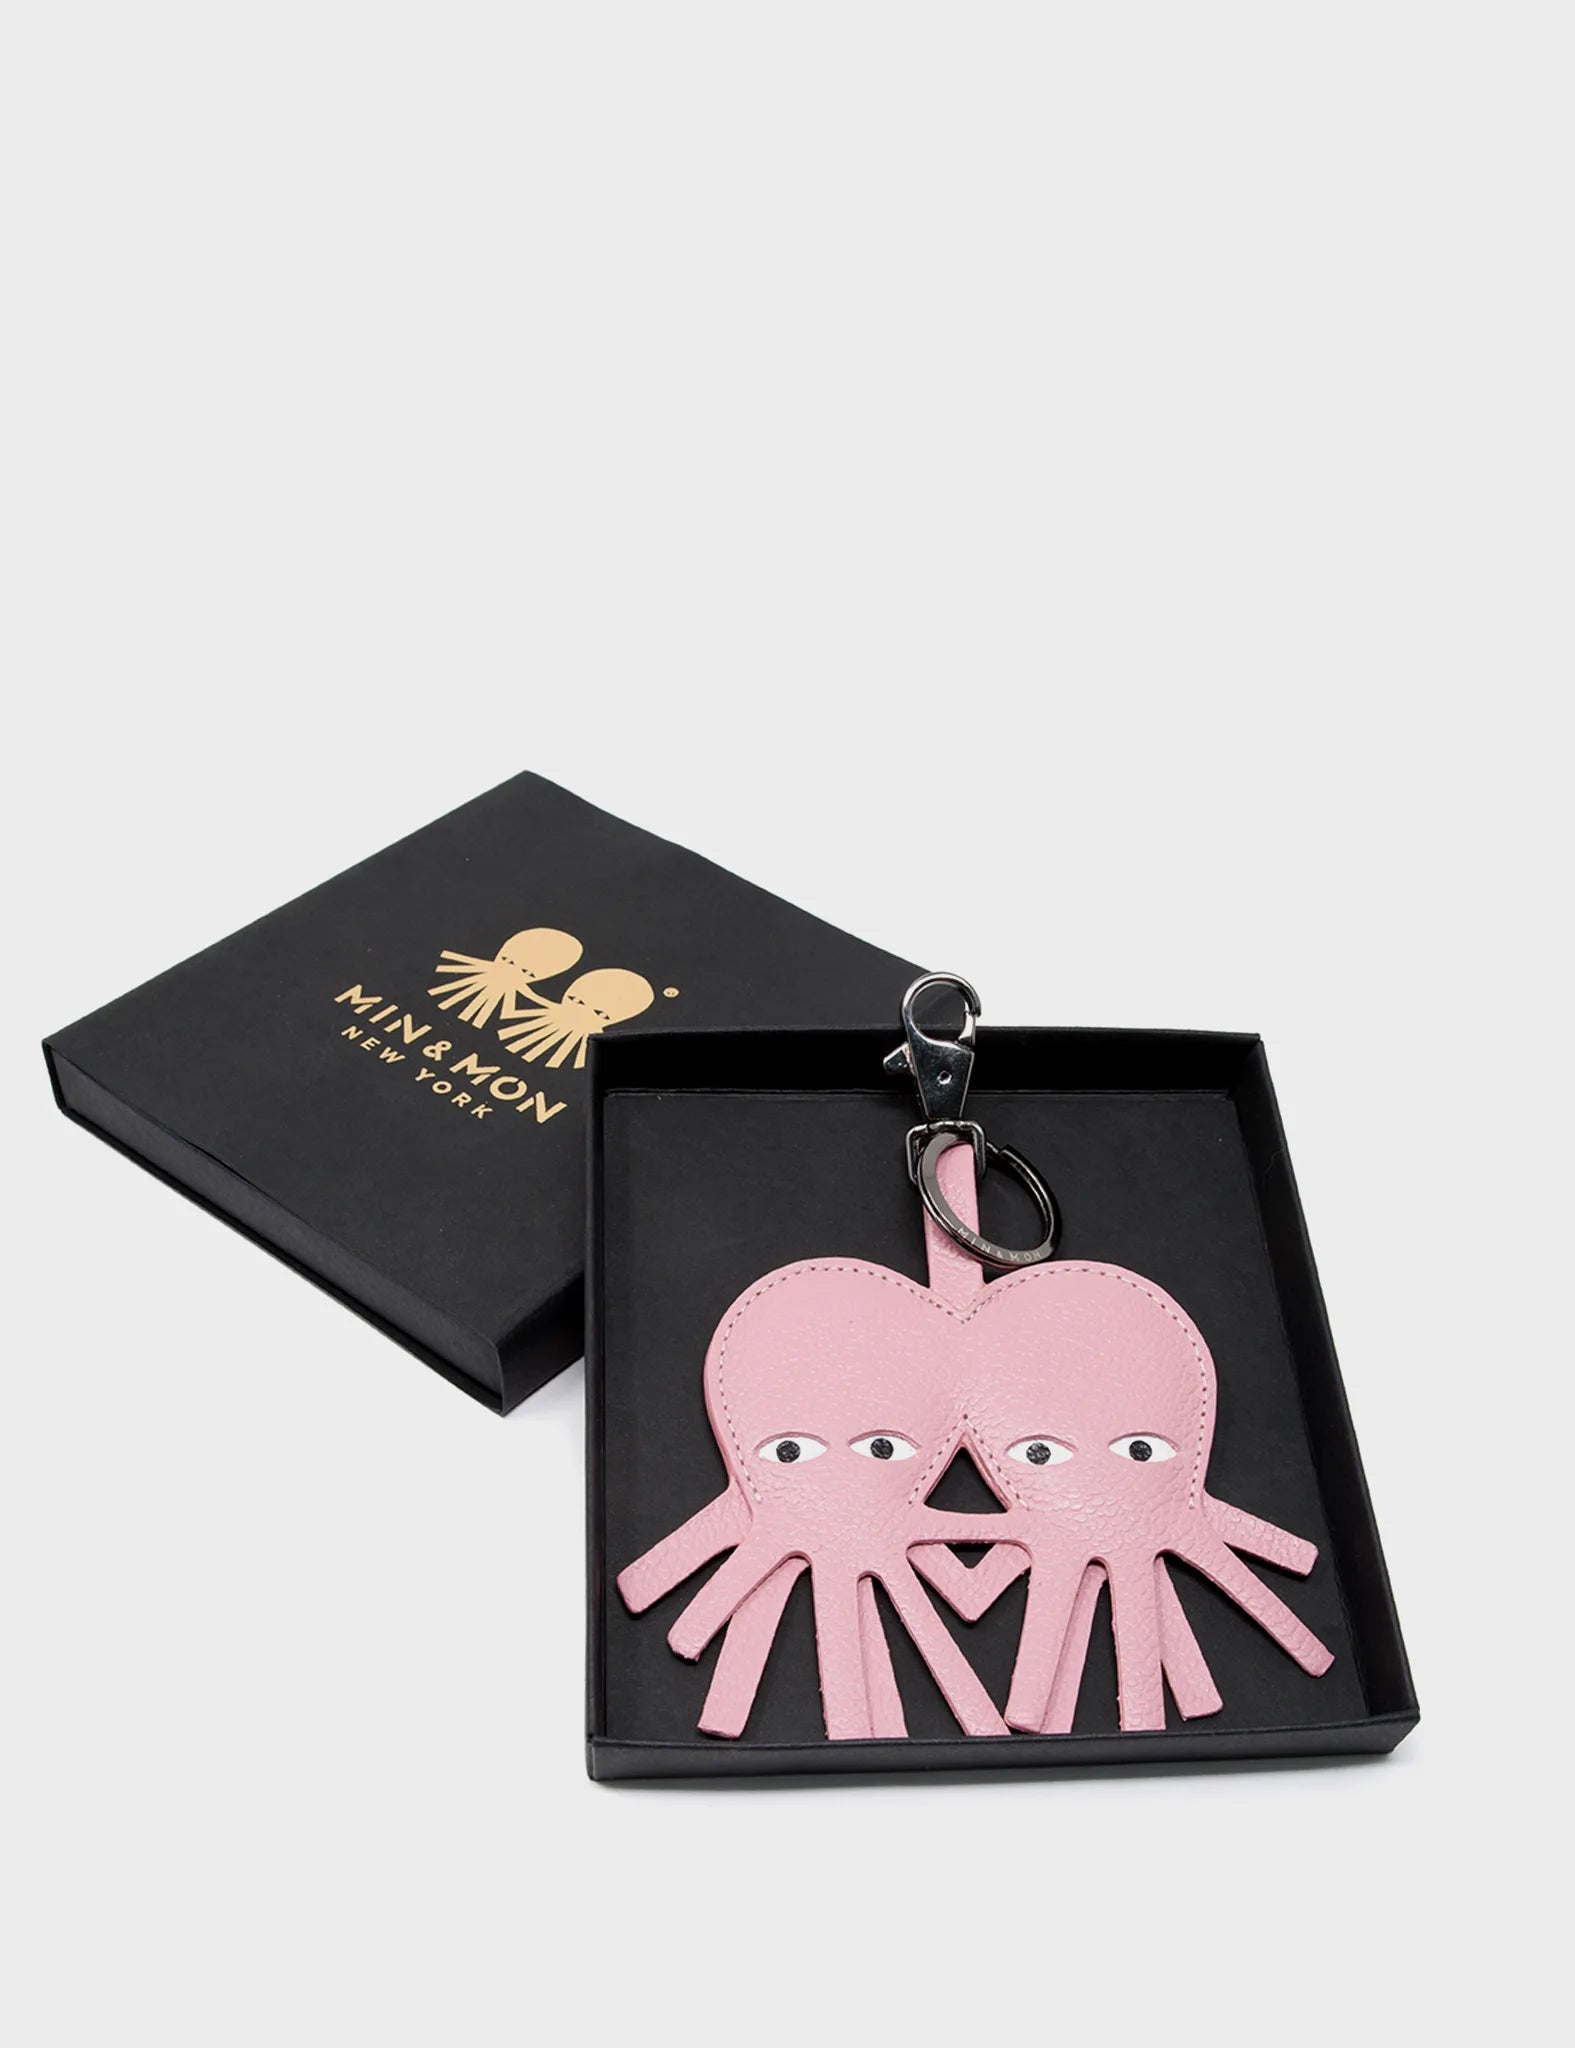 Octopus twins Charm - Blush Pink Leather Keychain - Package